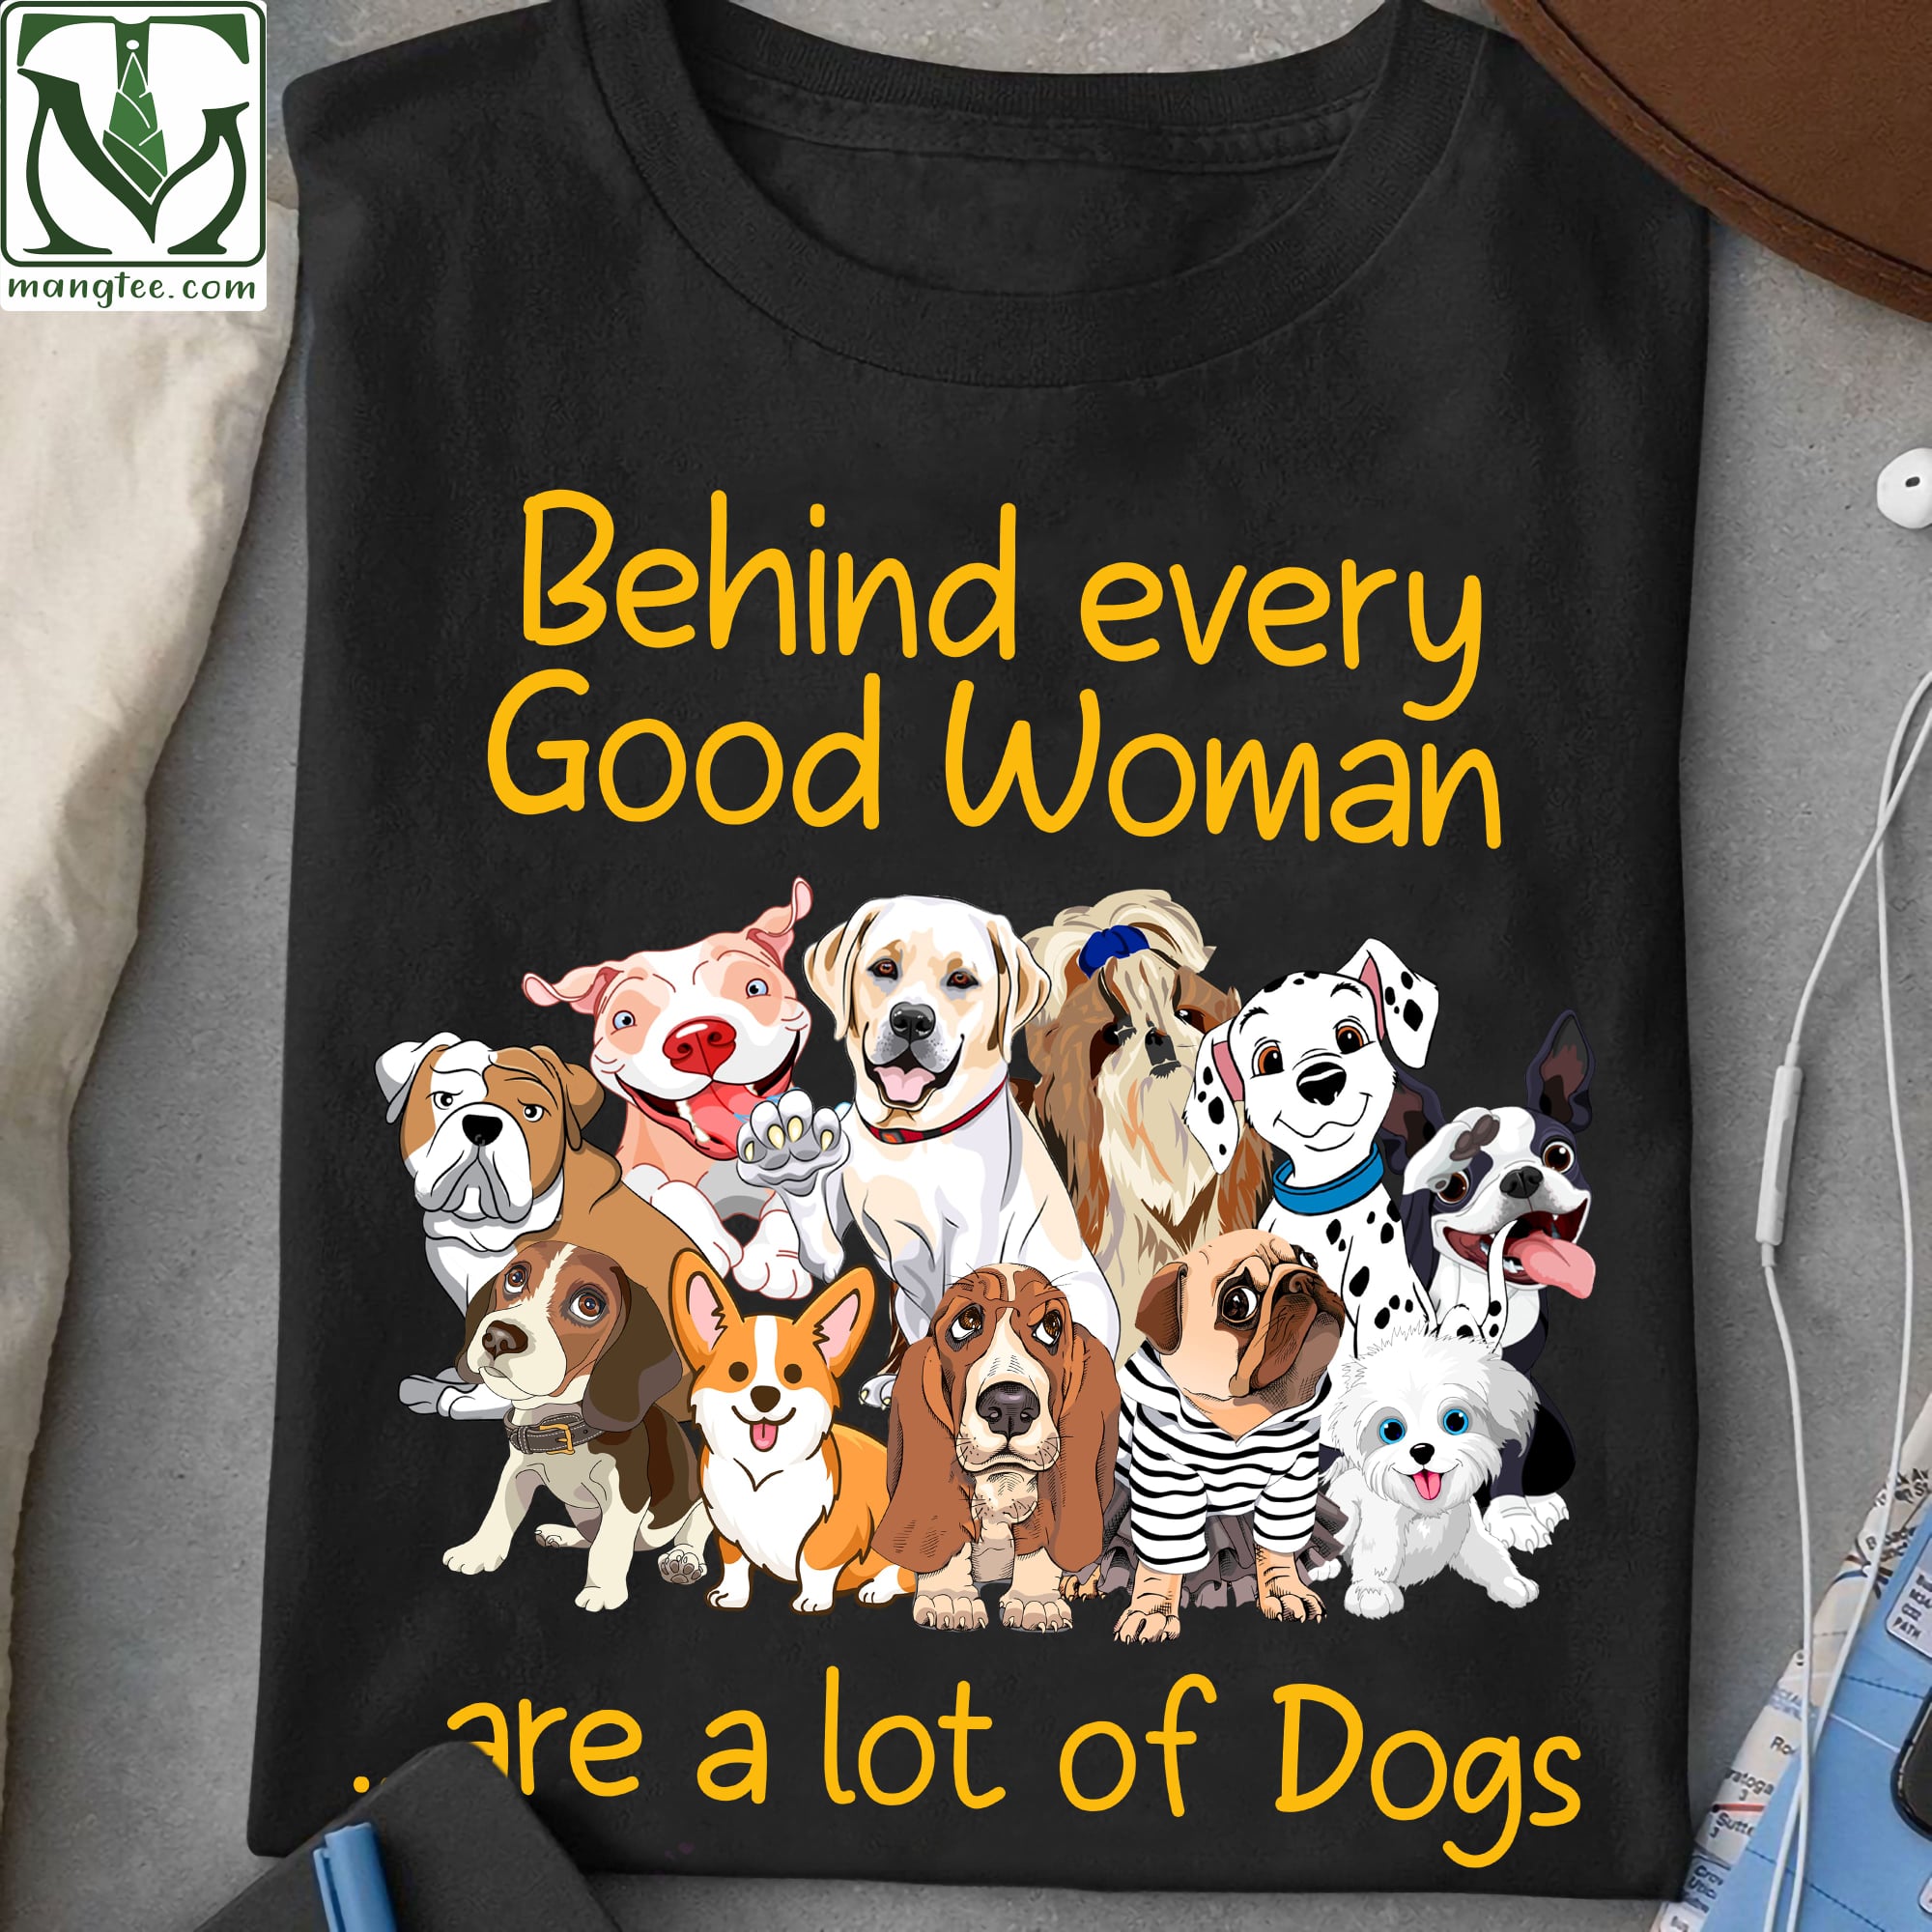 Behind every good woman are a lot of dogs - Dog lover, woman and dogs